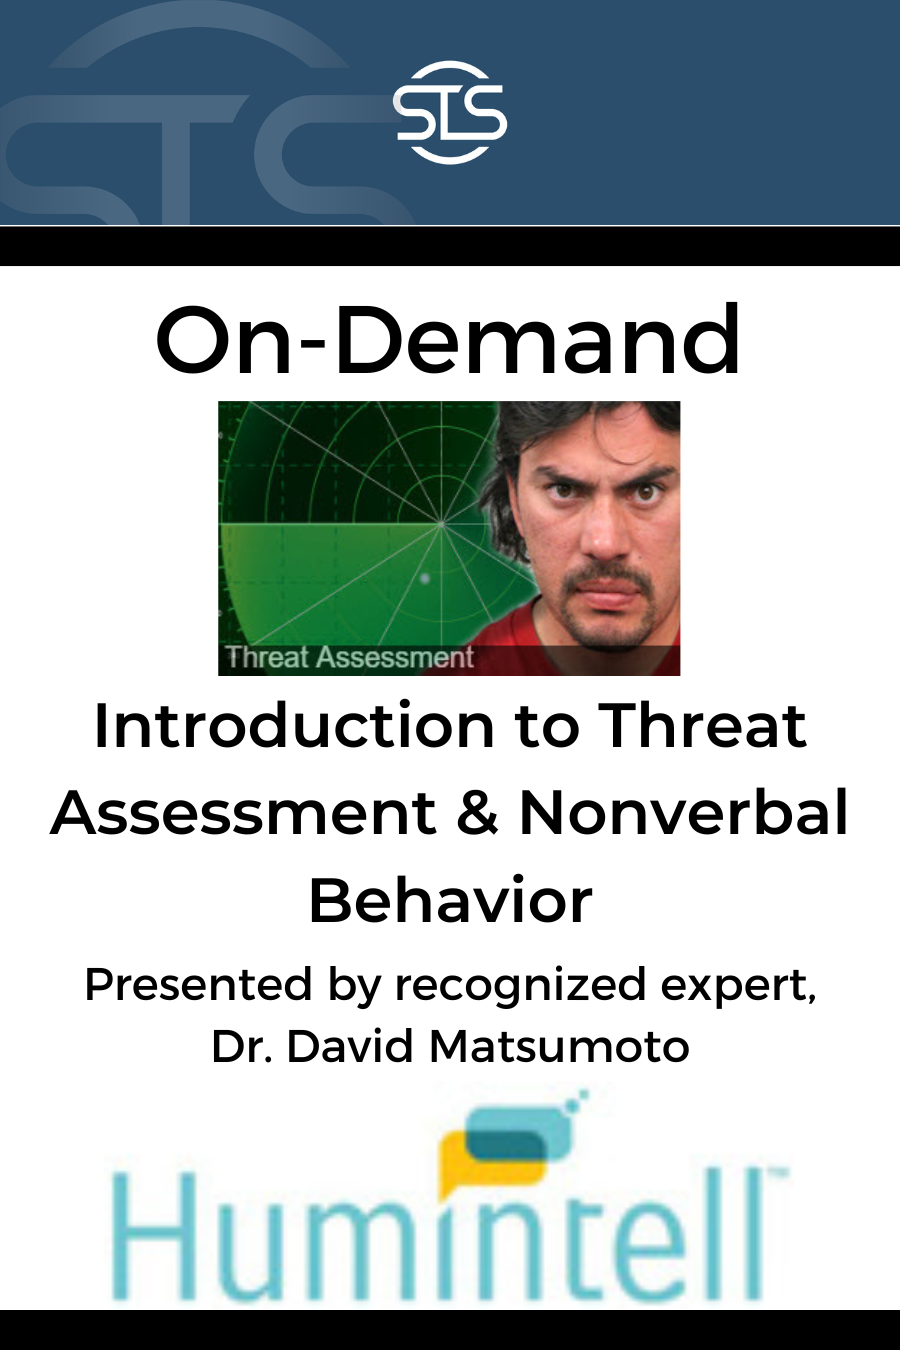 Introduction to Threat Assessment and Nonverbal Behavior